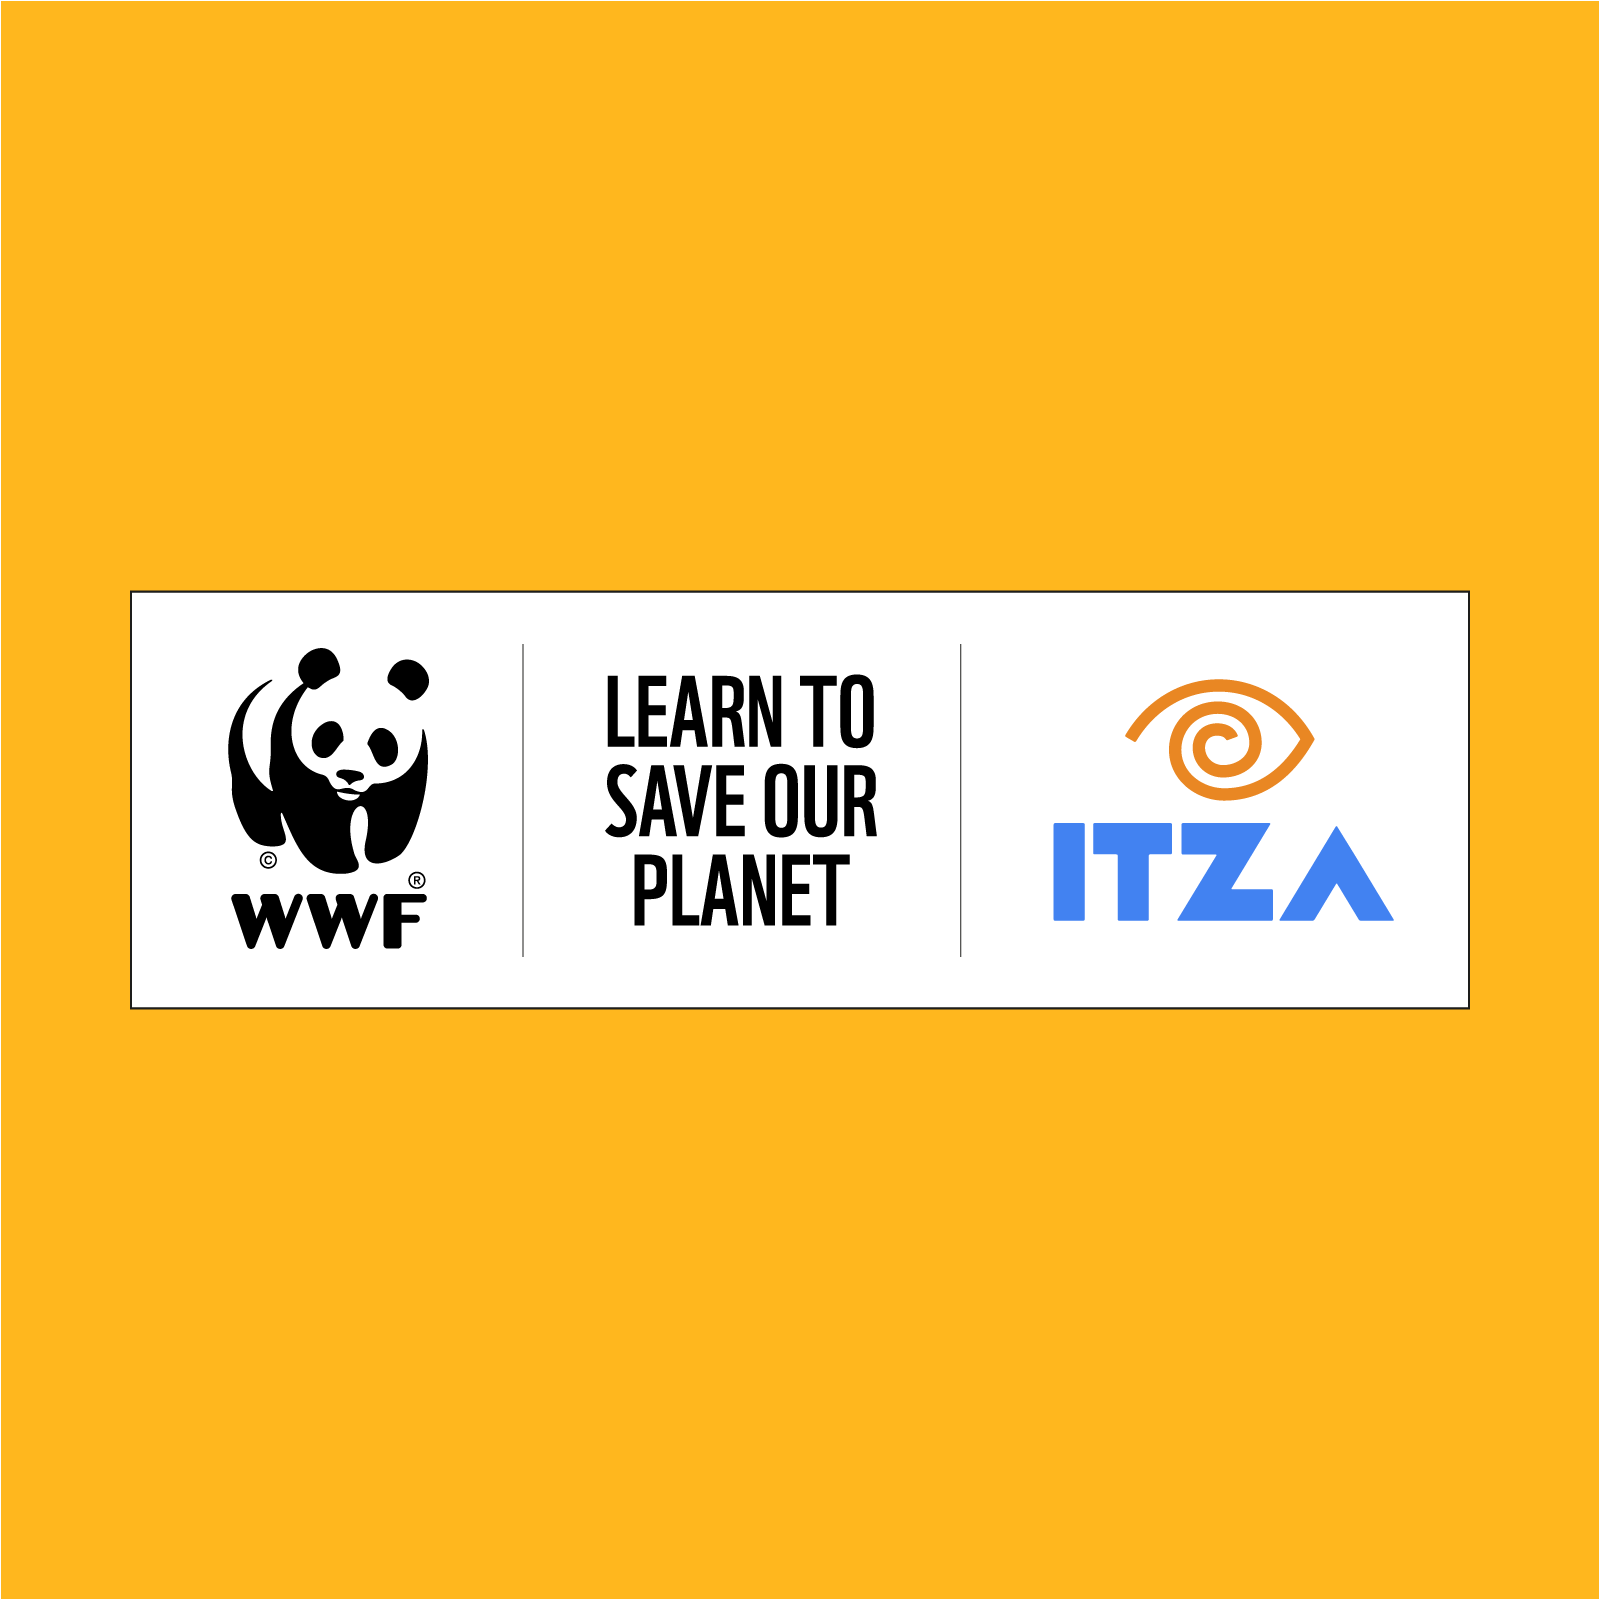 Learn to save our planet